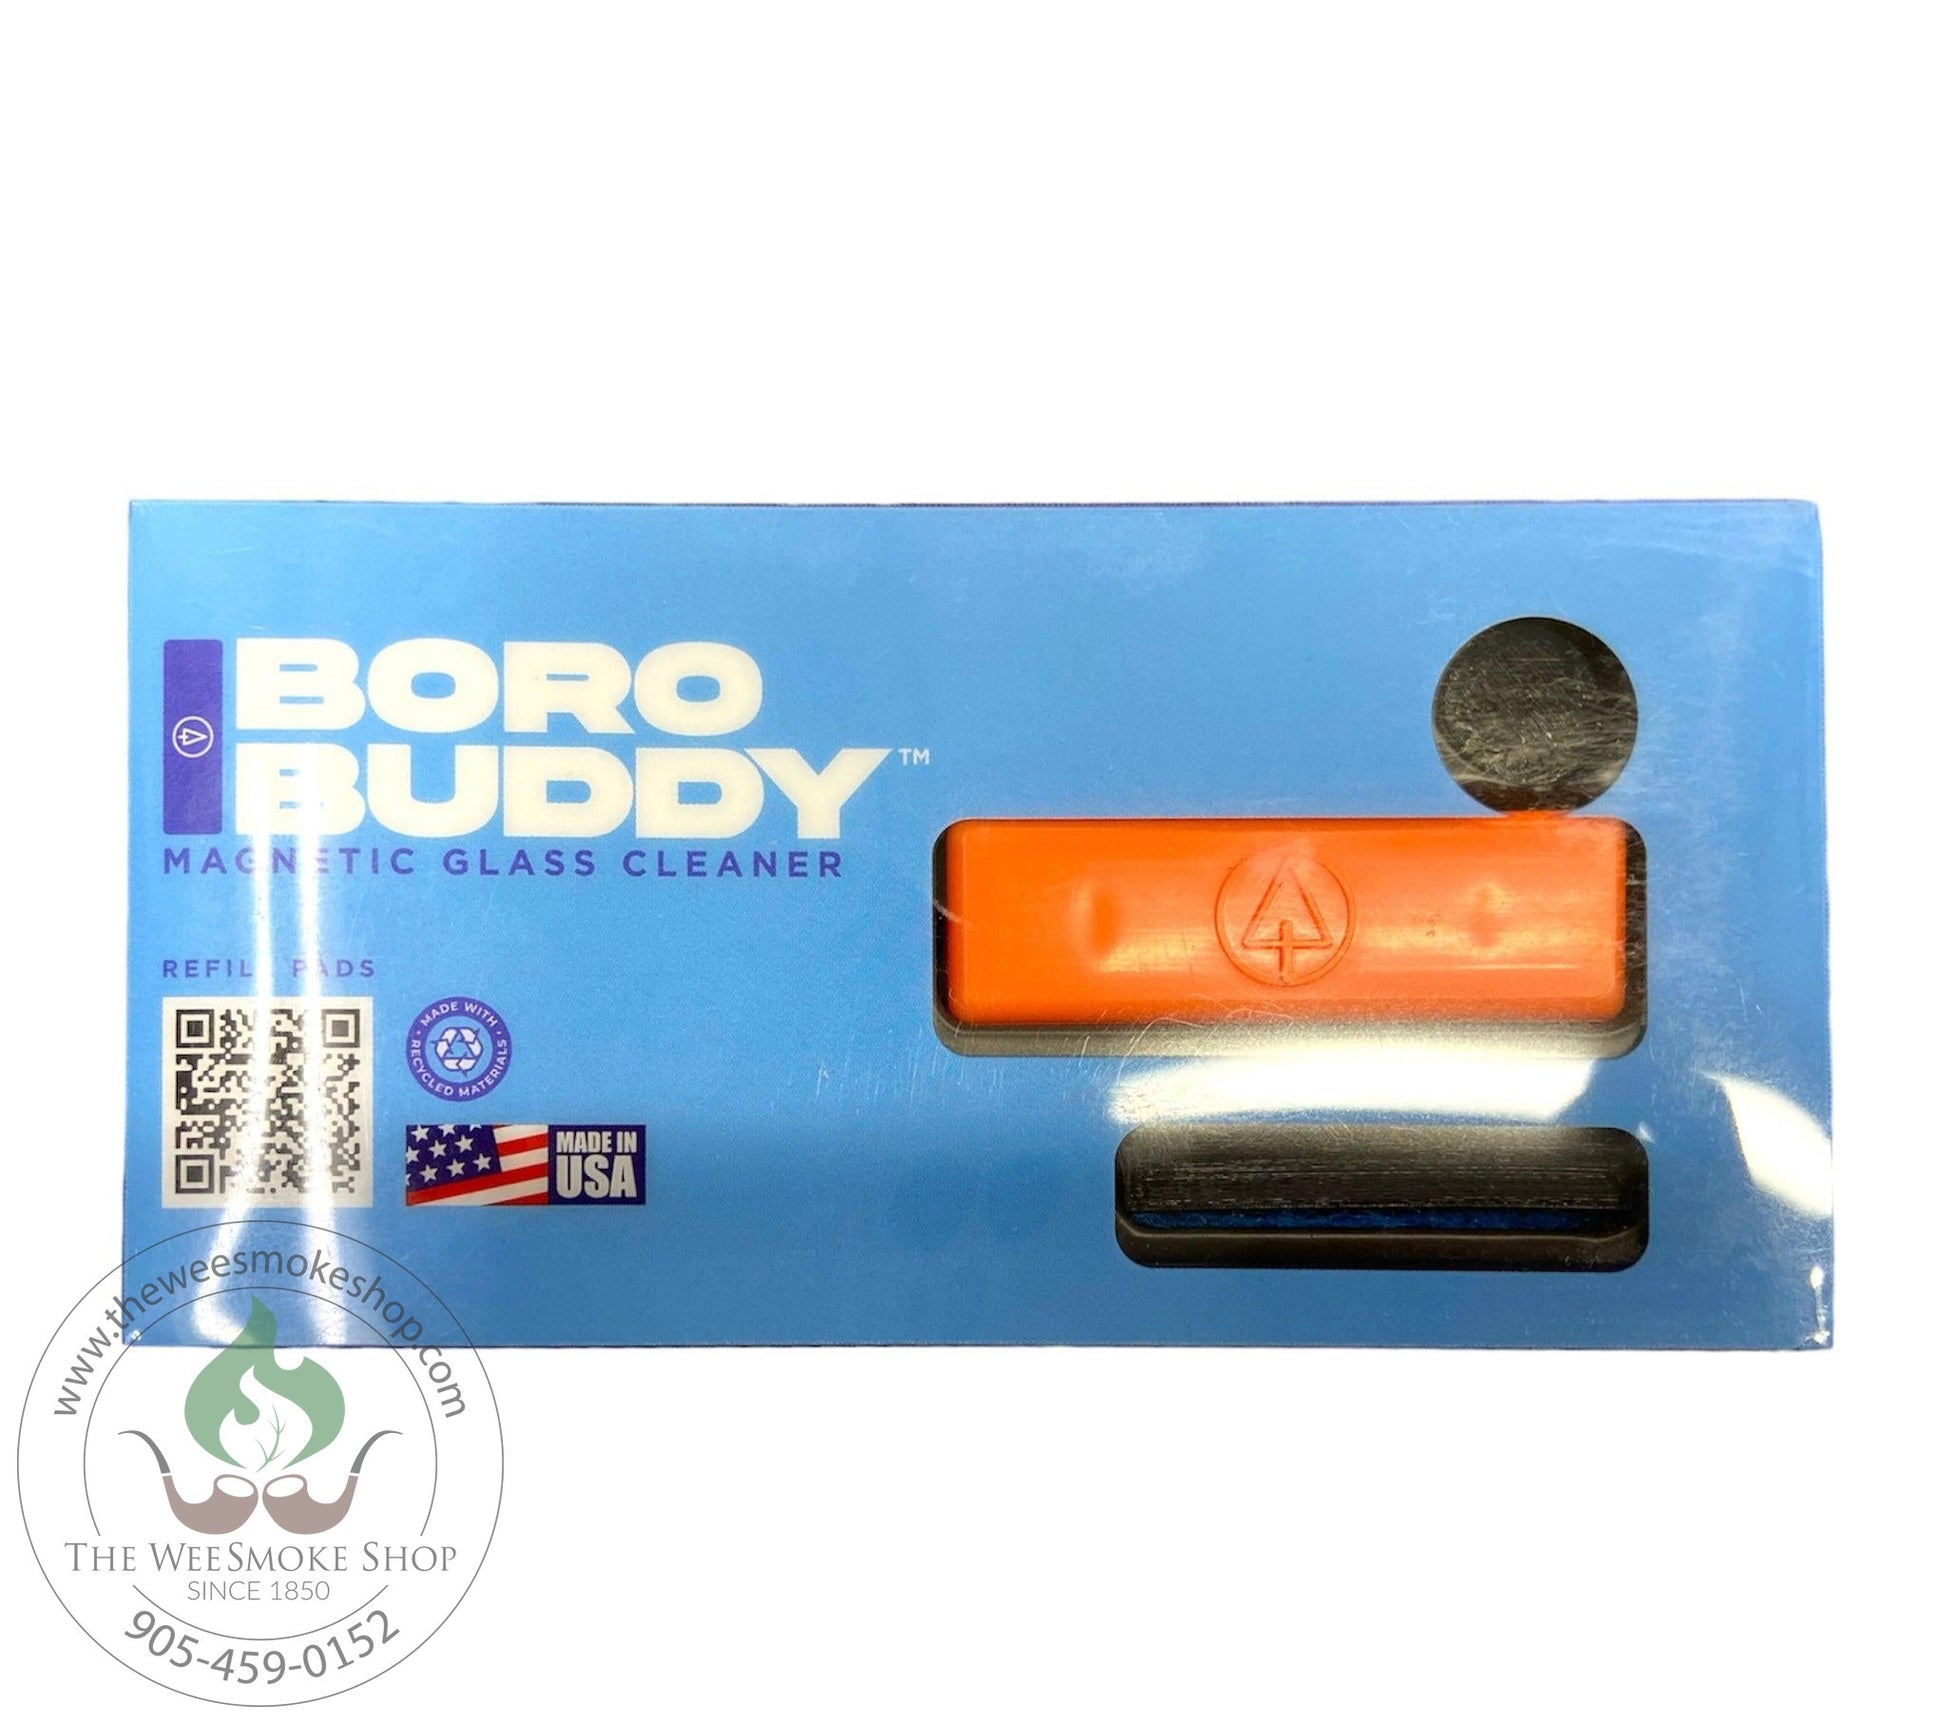 Orange-Boro Buddy Magnetic Glass Cleaner-Cleaning Accessories-The Wee Smoke Shop